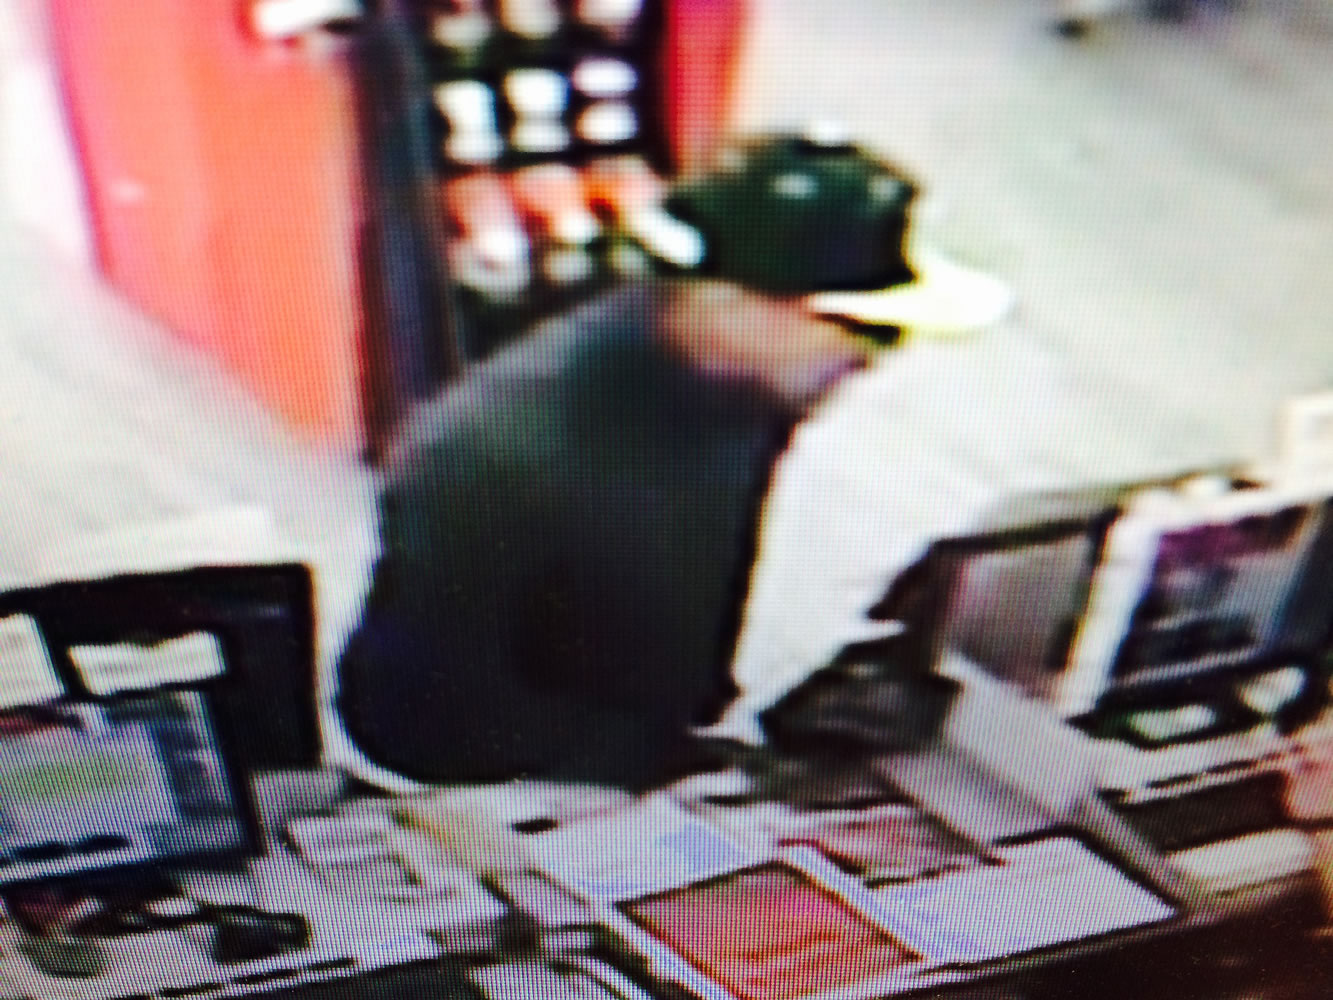 Vancouver police are looking for this suspect, who allegedly robbed a video game store.